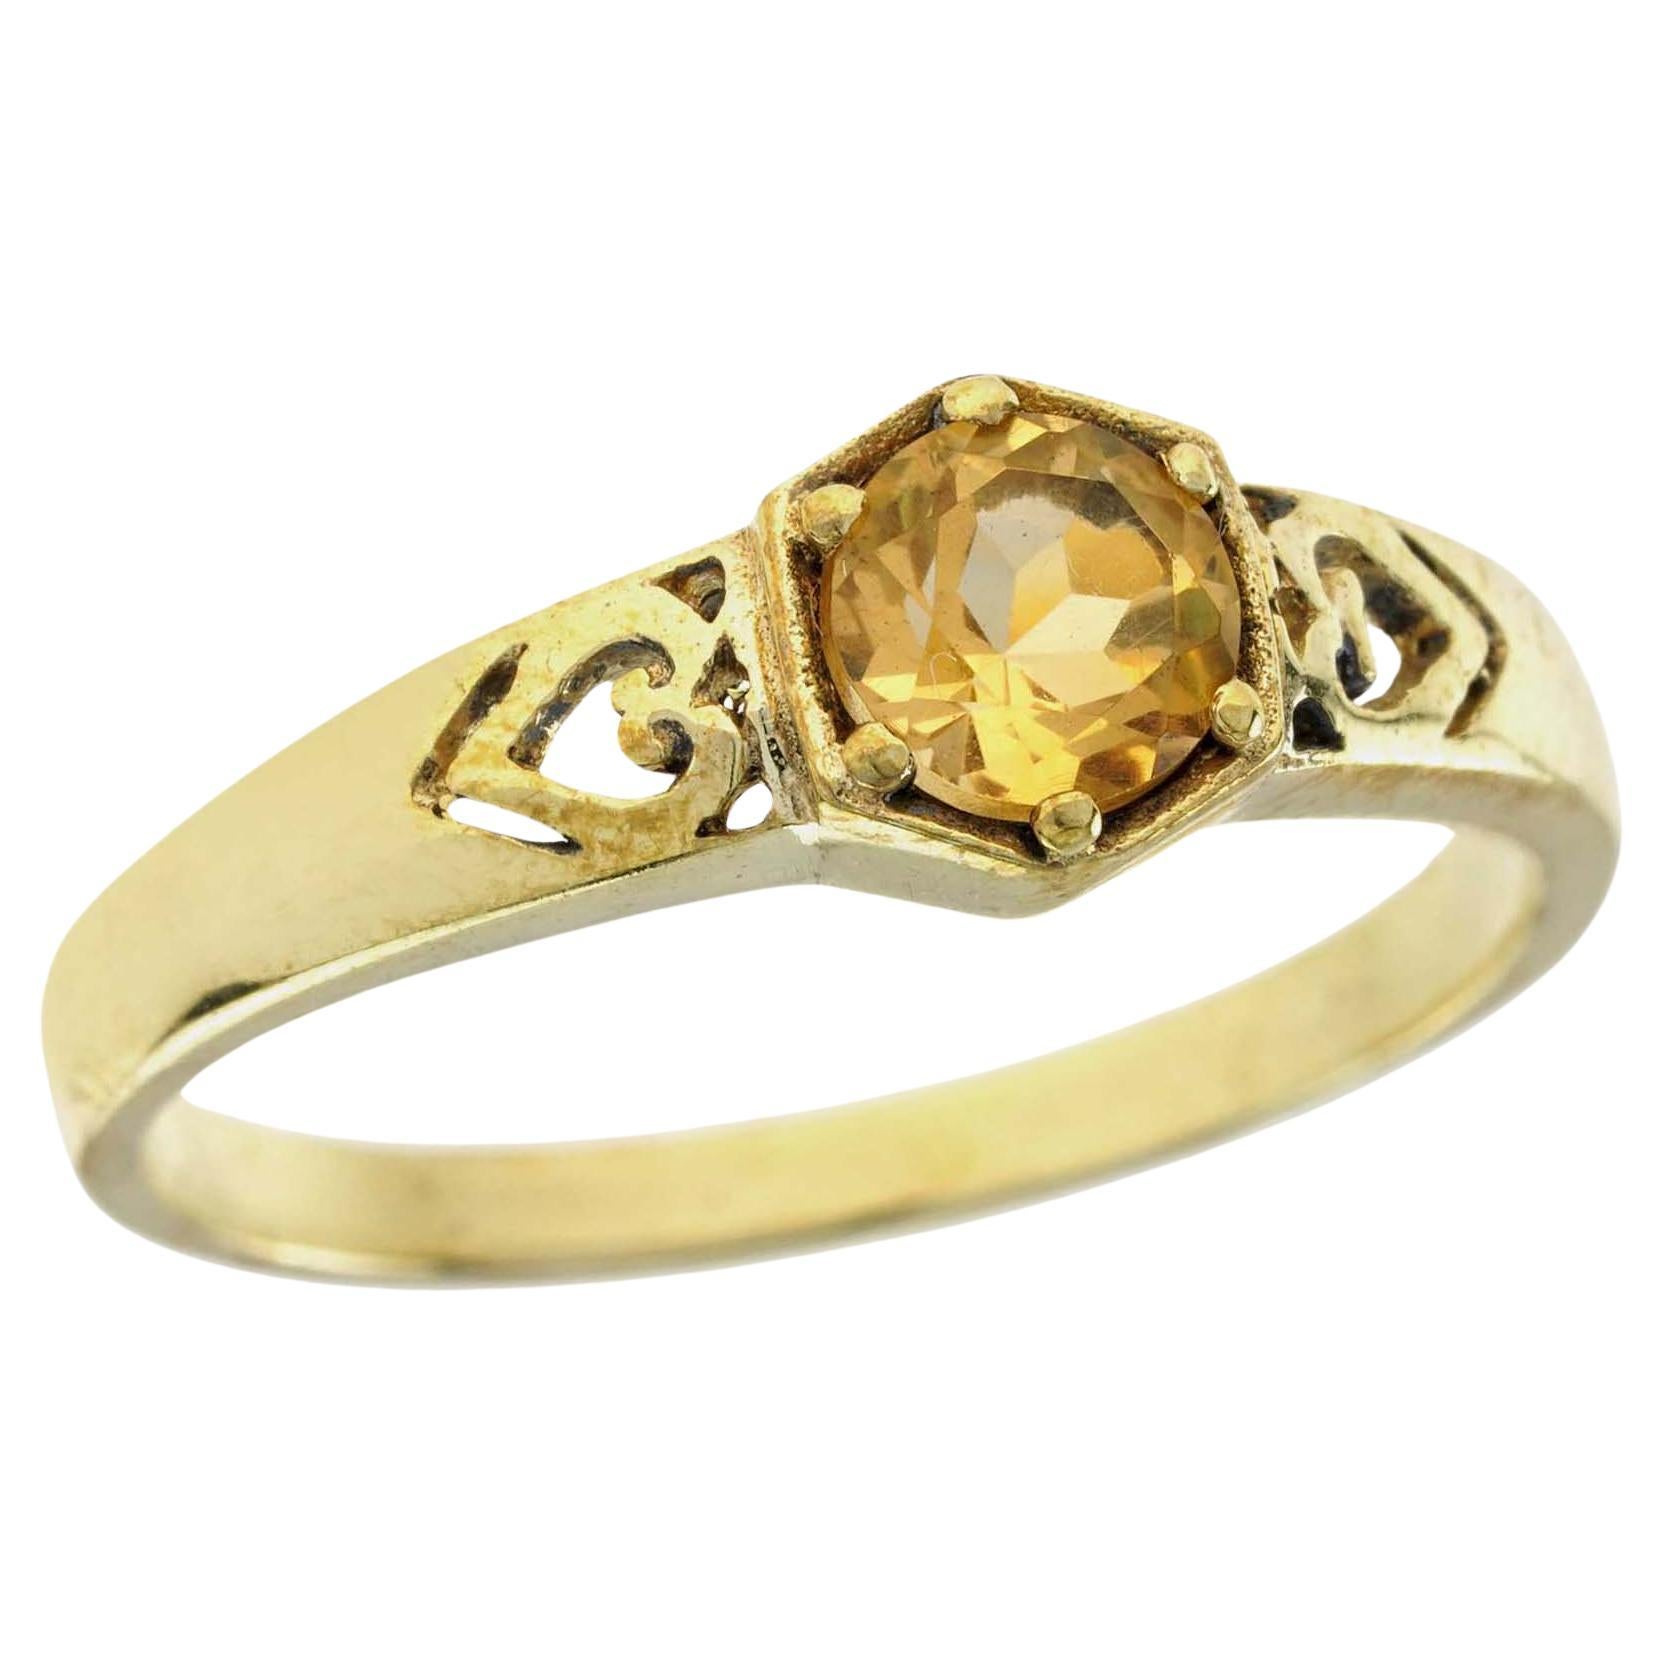 For Sale:  Natural Citrine Vintage Style Heart Solitaire Ring in Solid 9K Yellow Gold